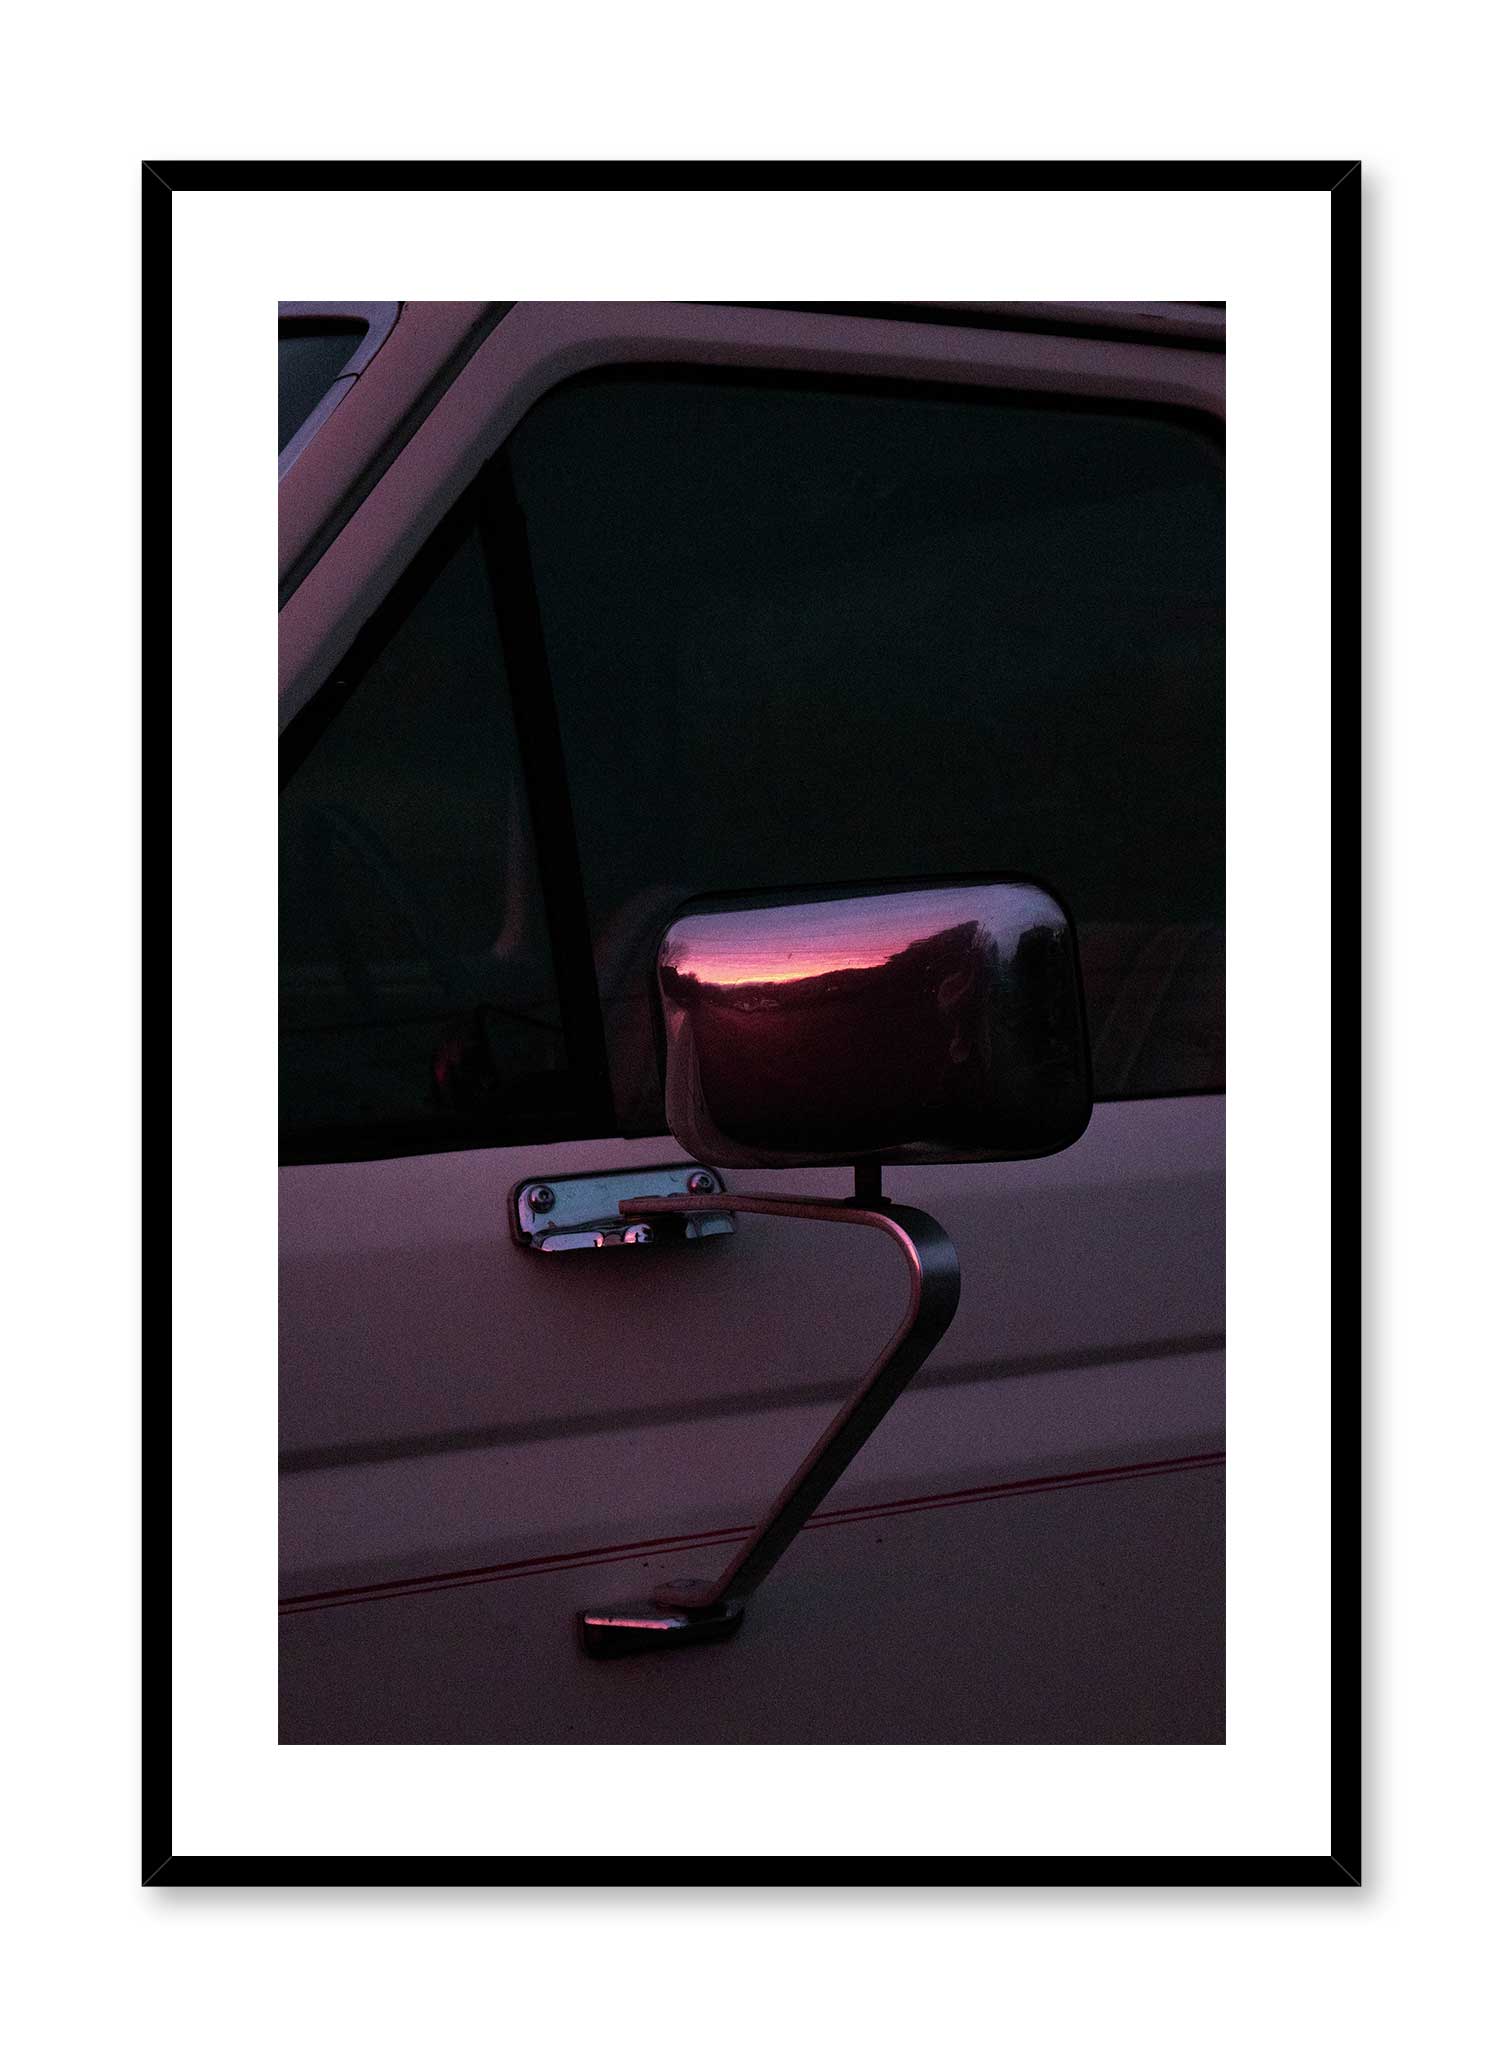 Rearview Sunset is a photography poster of a sunset reflecting on the rearview mirror of a retro car by Opposite Wall.